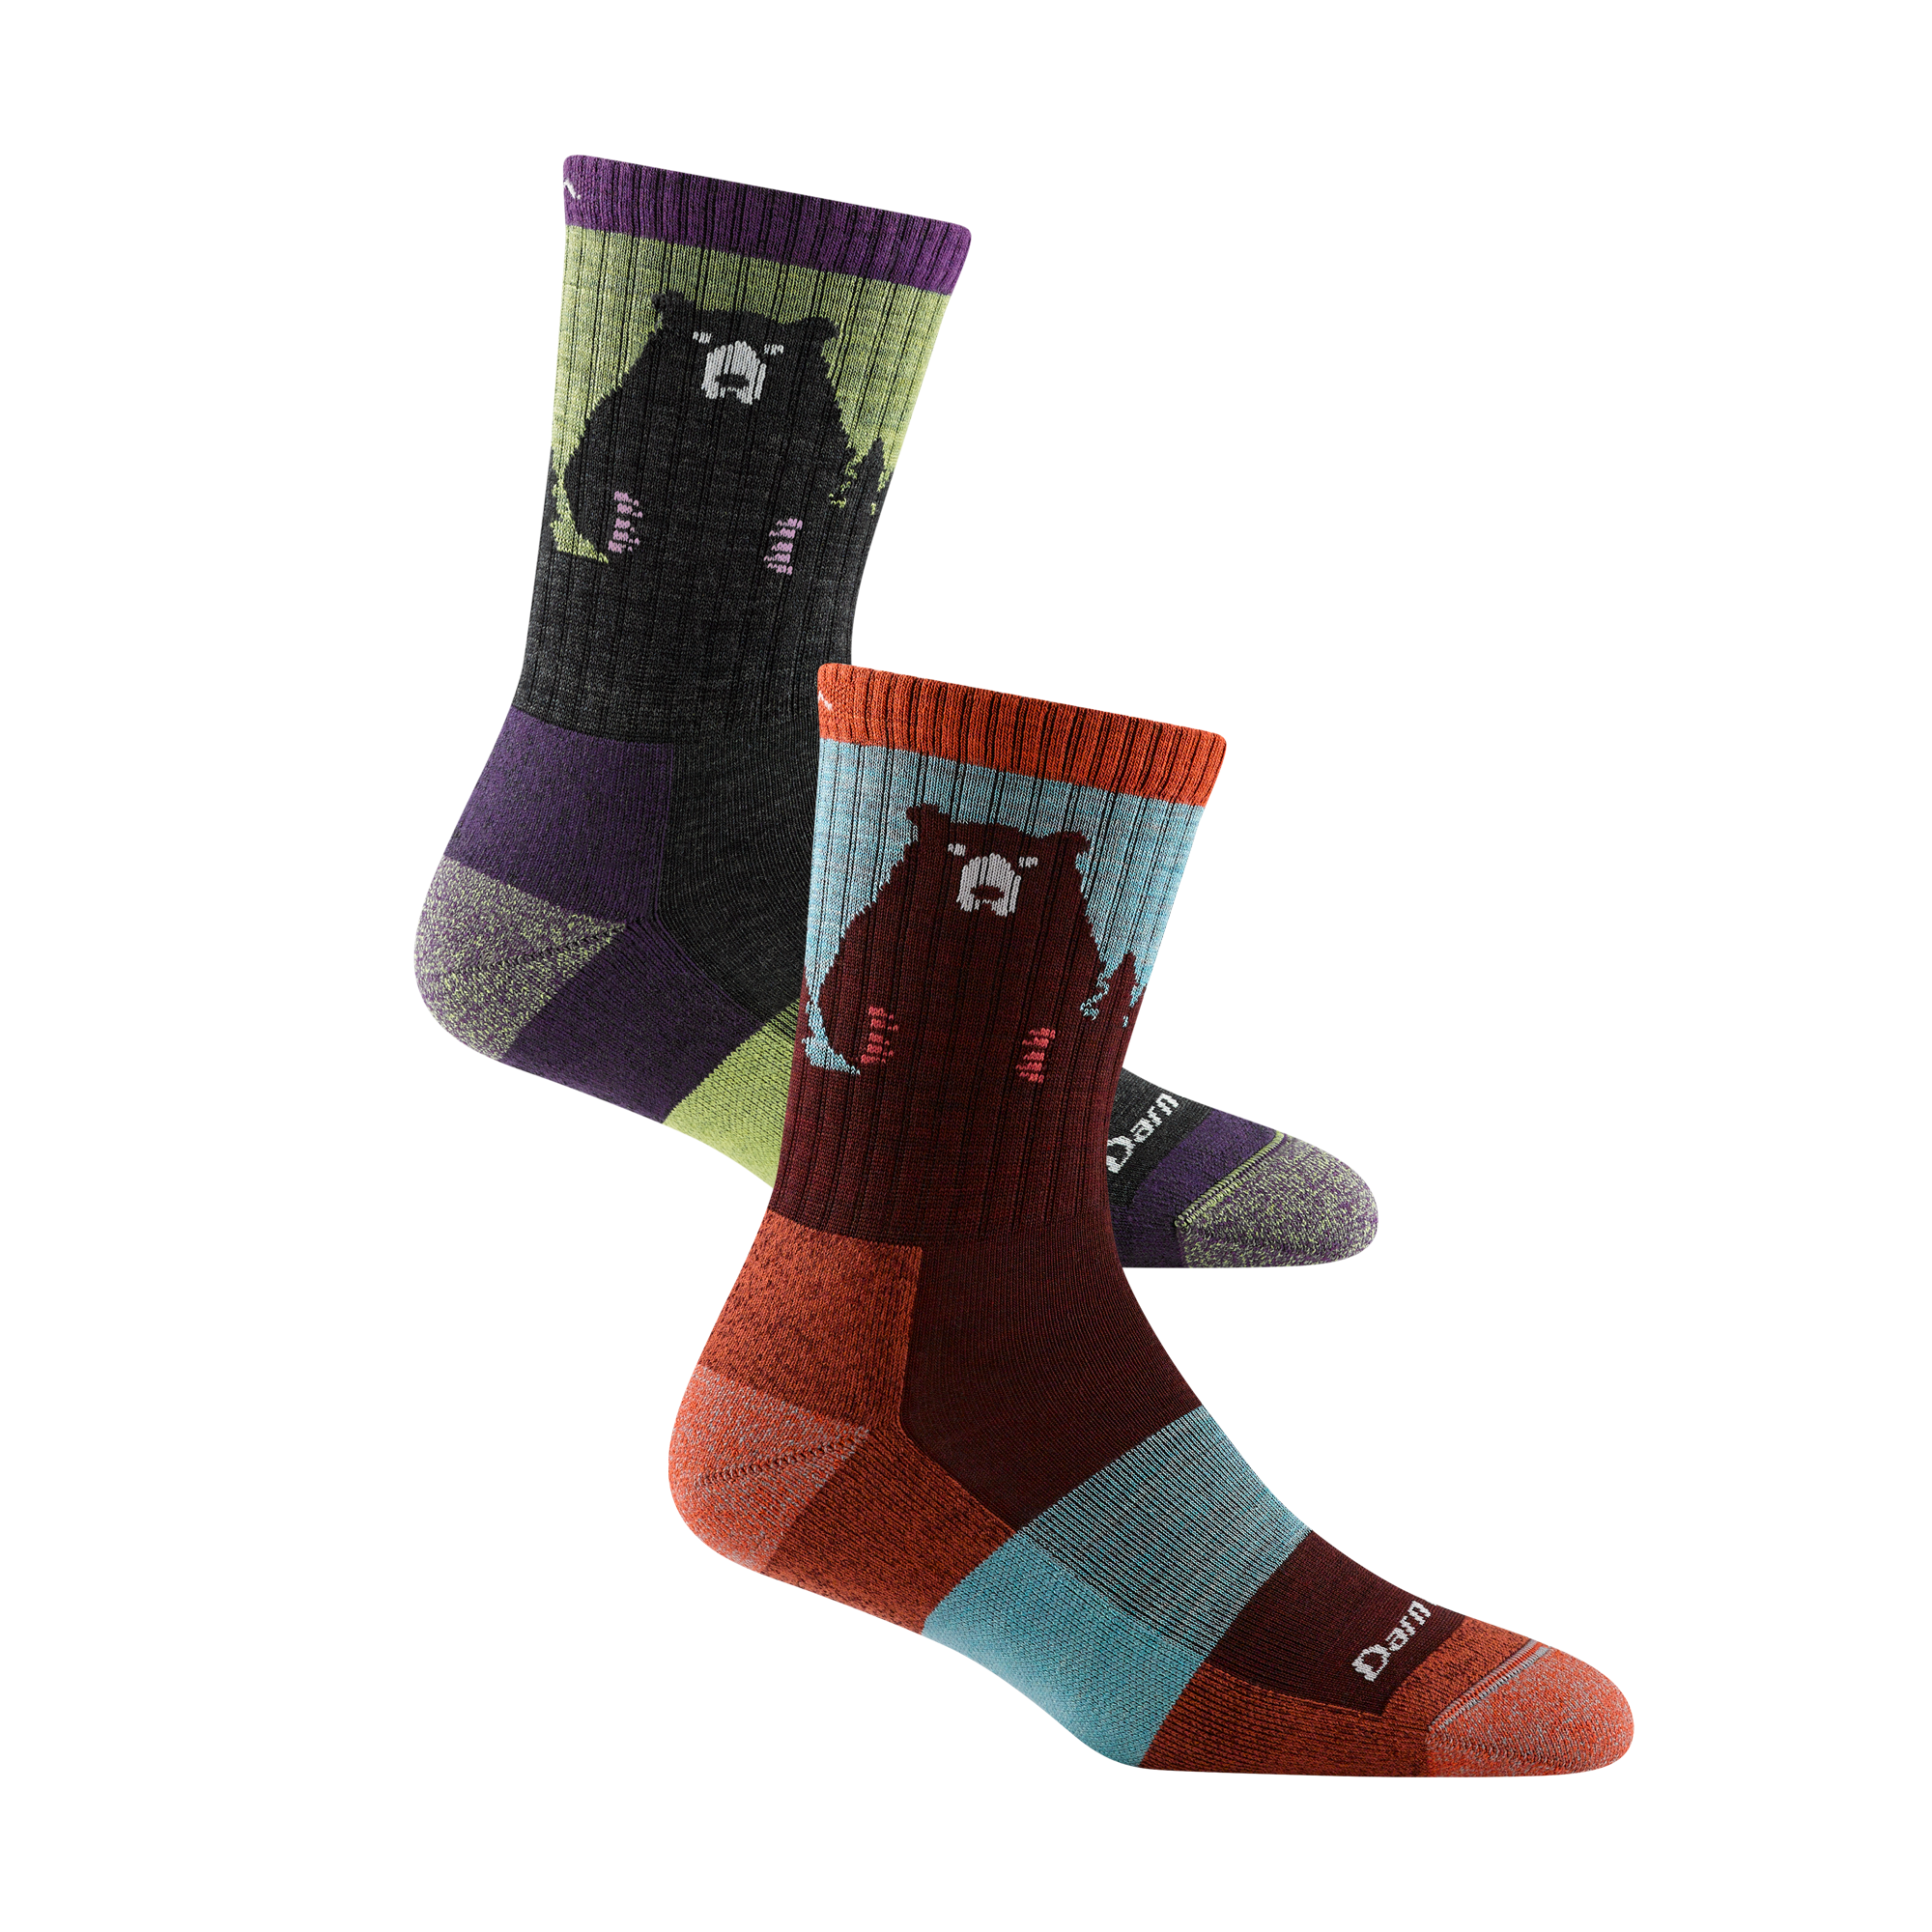 2 pack bundle including 2 pairs of the women's bear town micro crew hiking sock in lime and burgundy